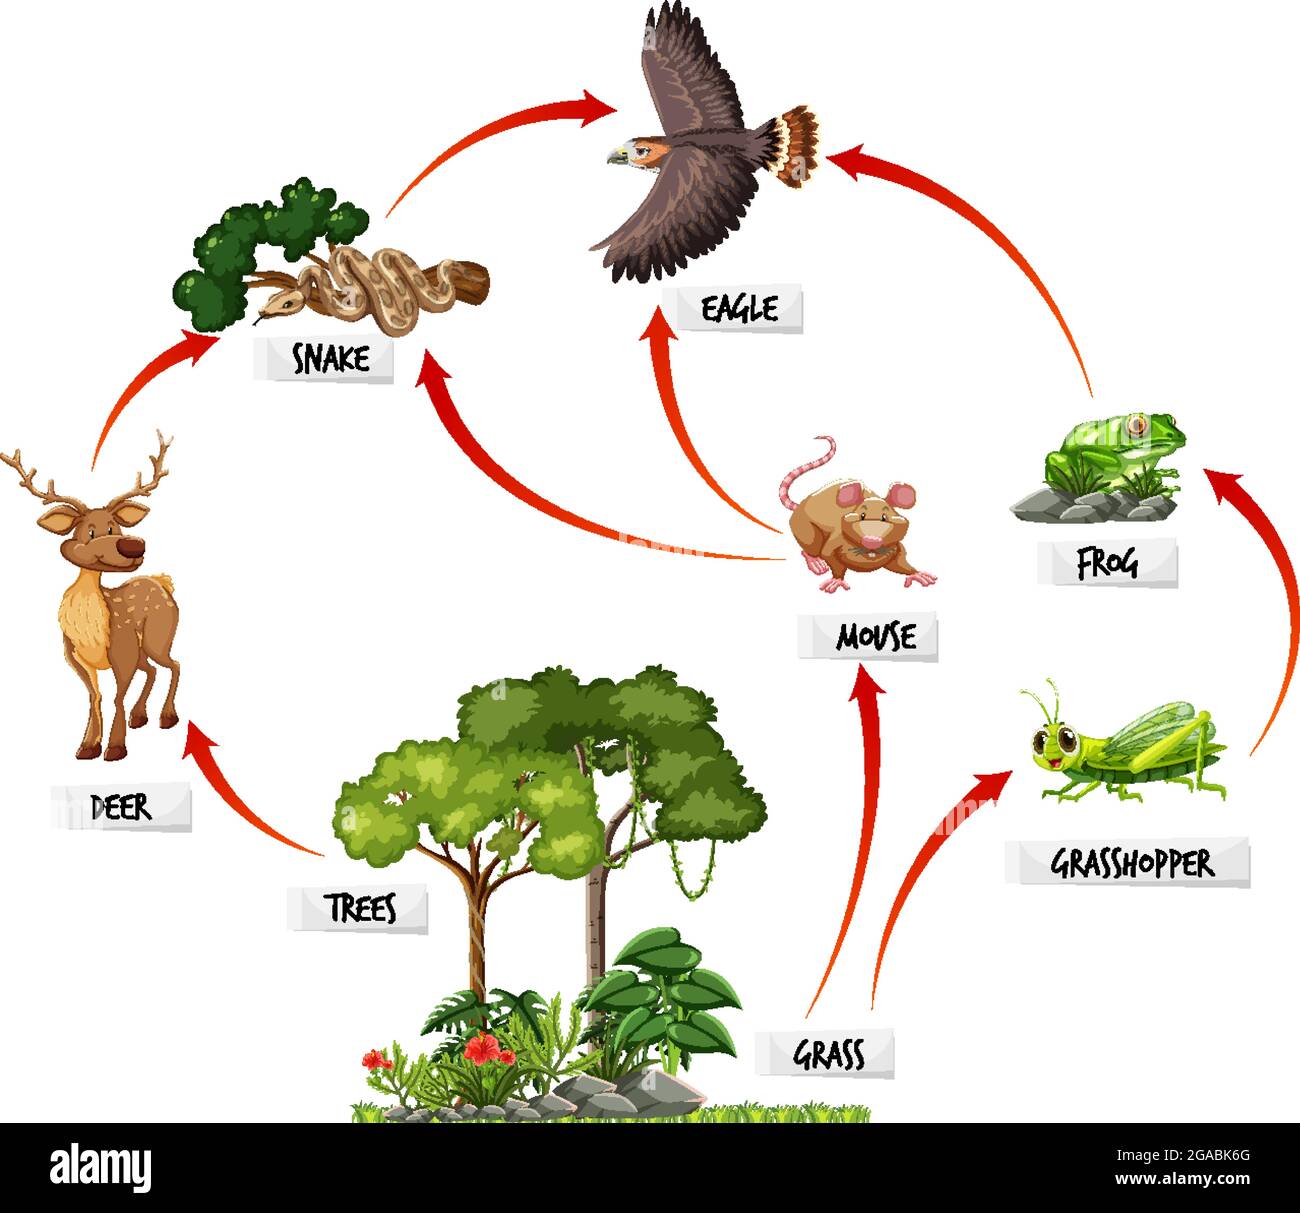 Diagram showing food web in the rainforest illustration Stock Vector Image  & Art - Alamy